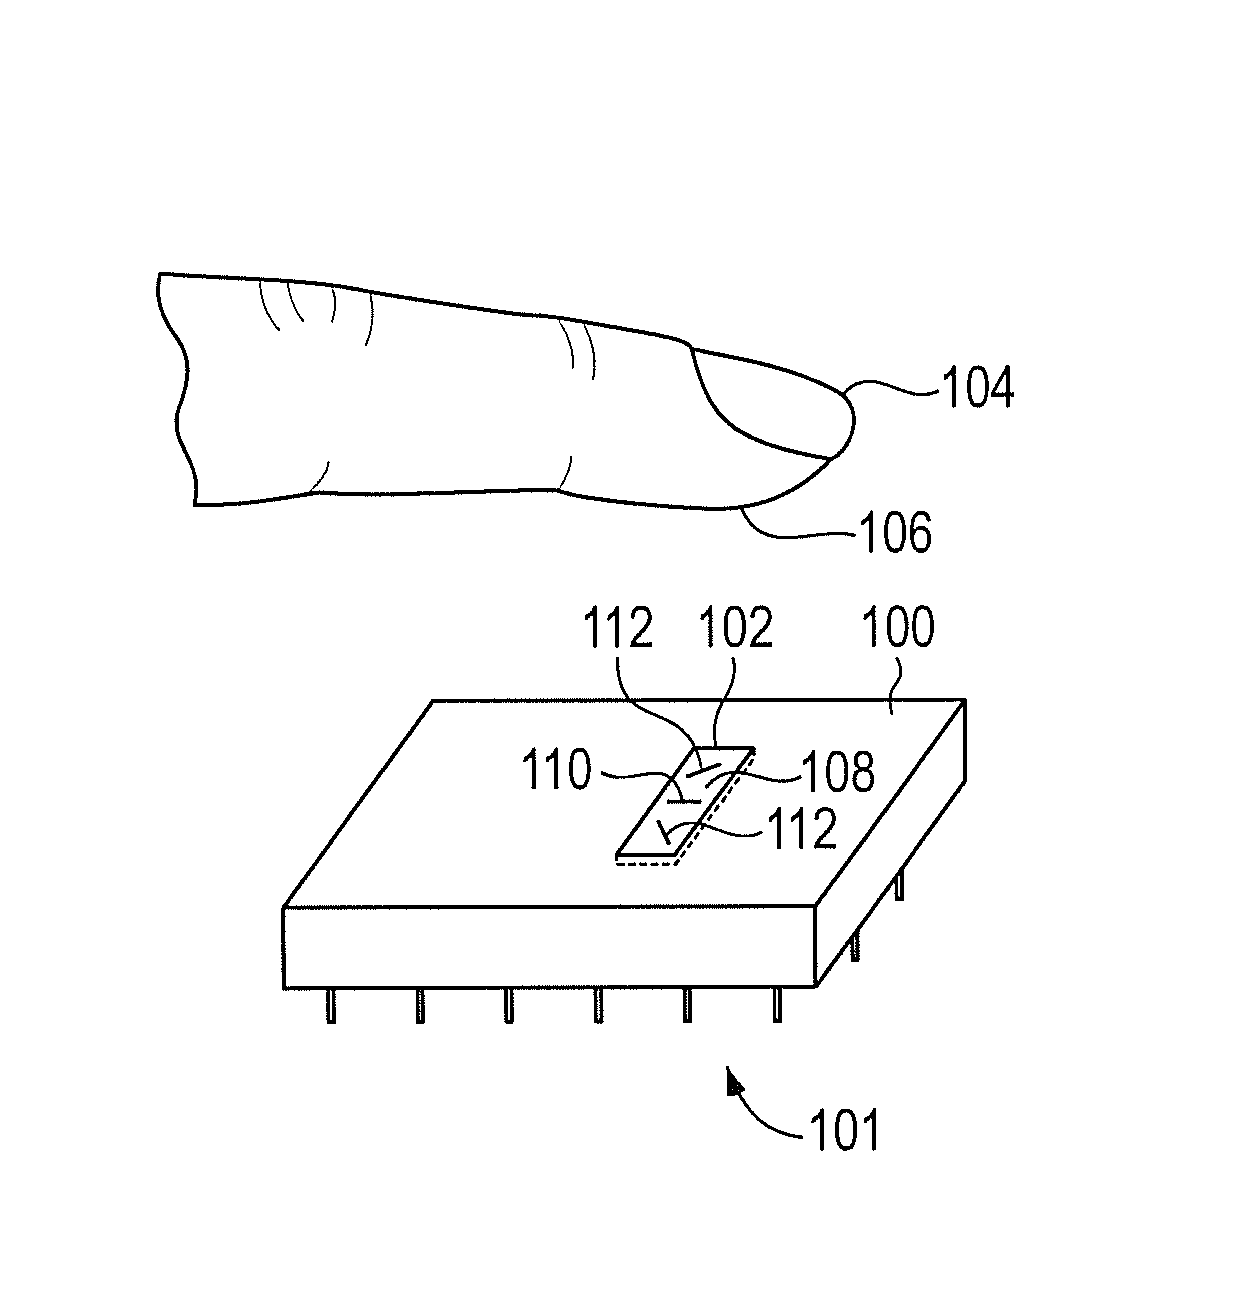 Method and apparatus for two-dimensional finger motion tracking and control